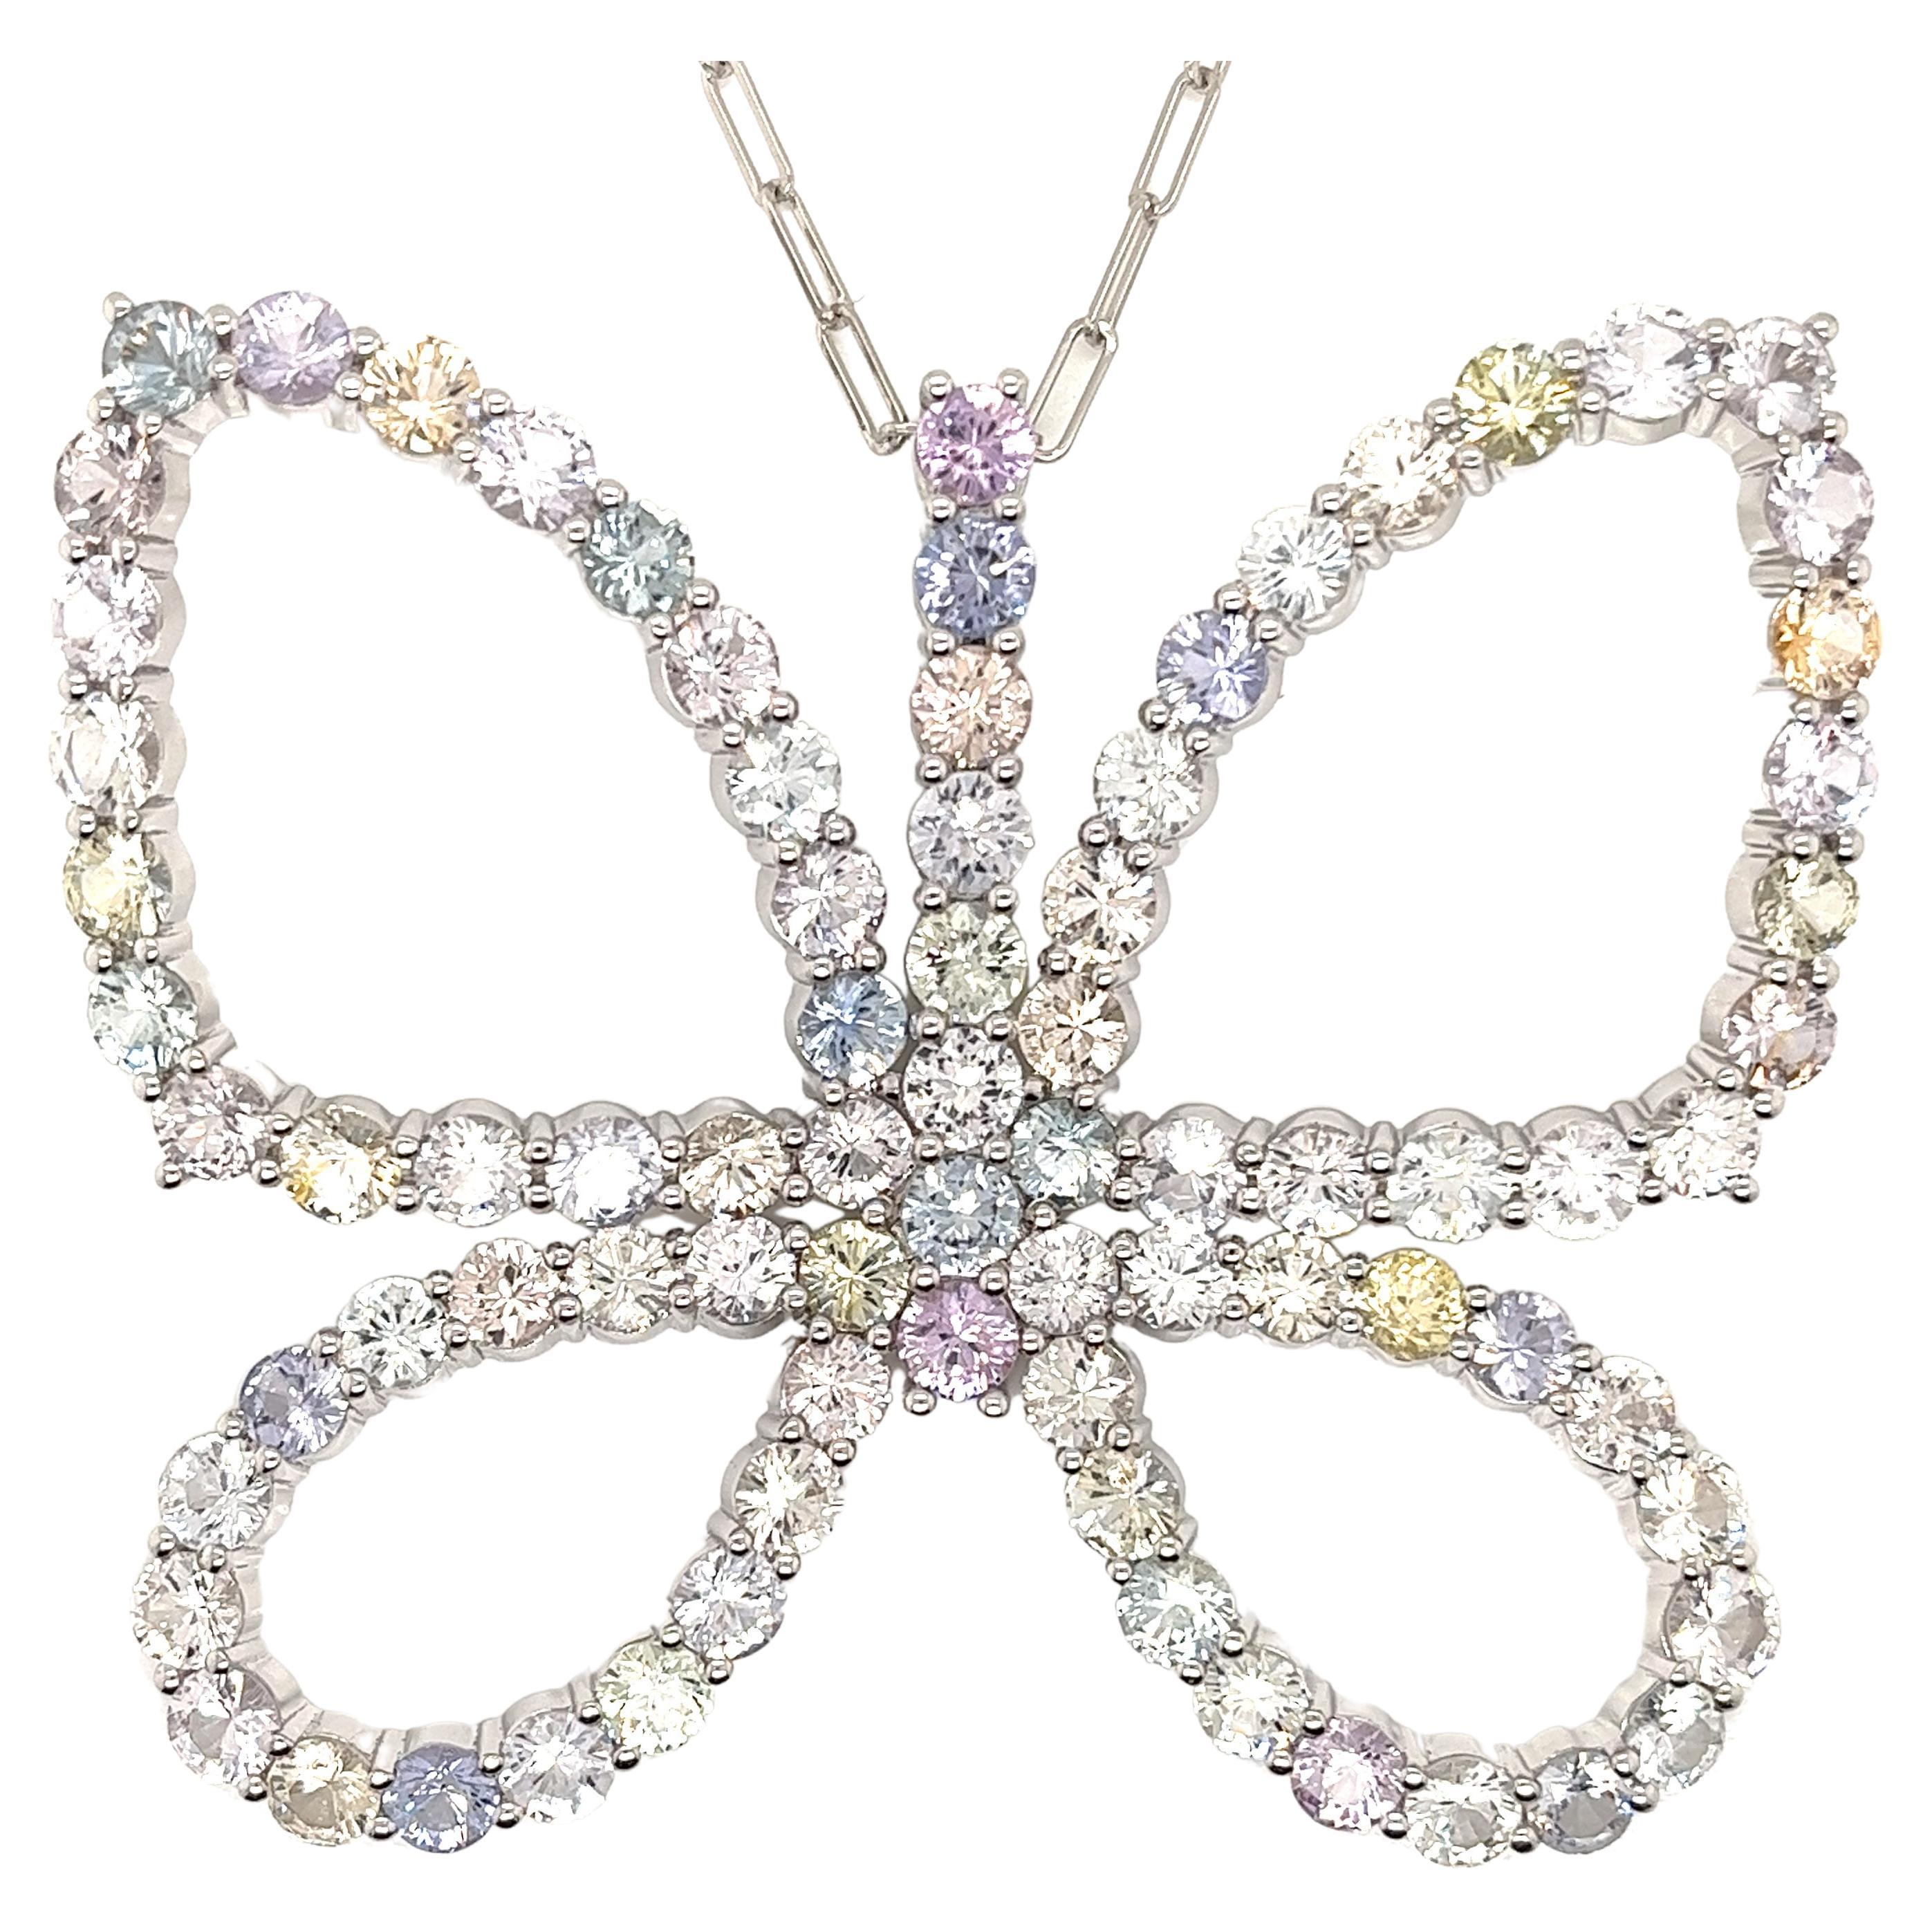 Multi-Colored Sapphire Butterfly Necklace in 18 Karat White Gold